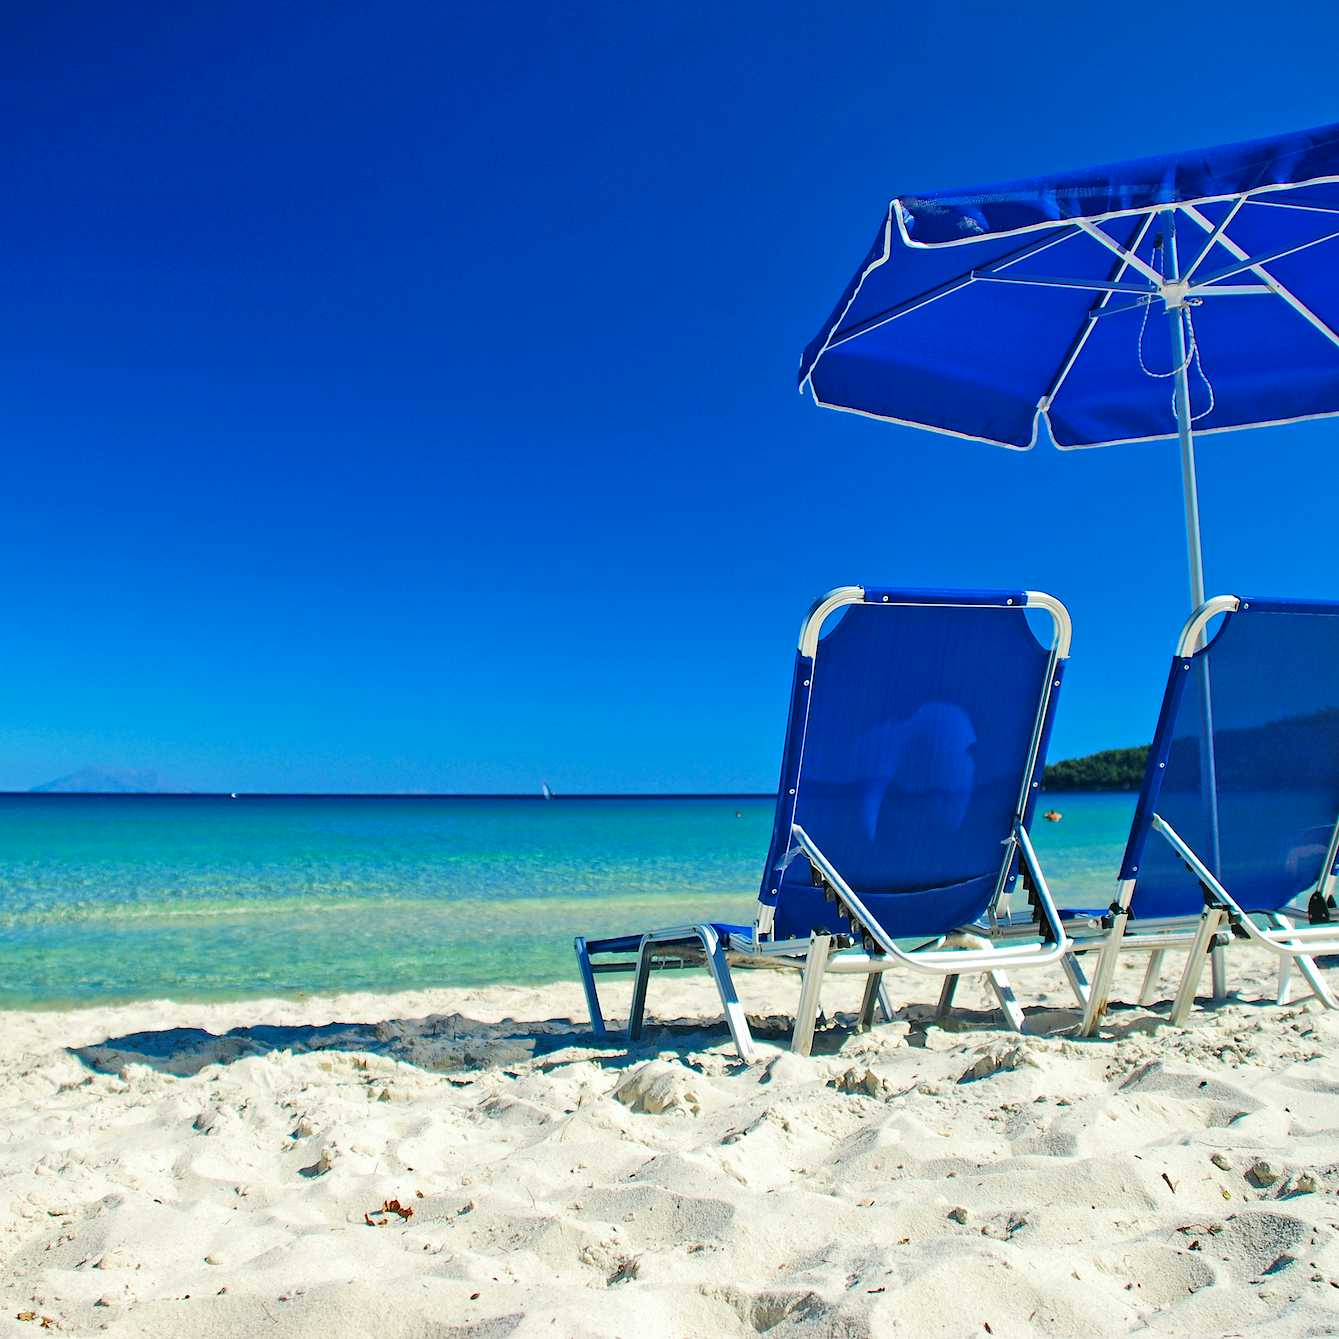 Photo Caption: Spend your day relaxing in the sun at Golden Beach